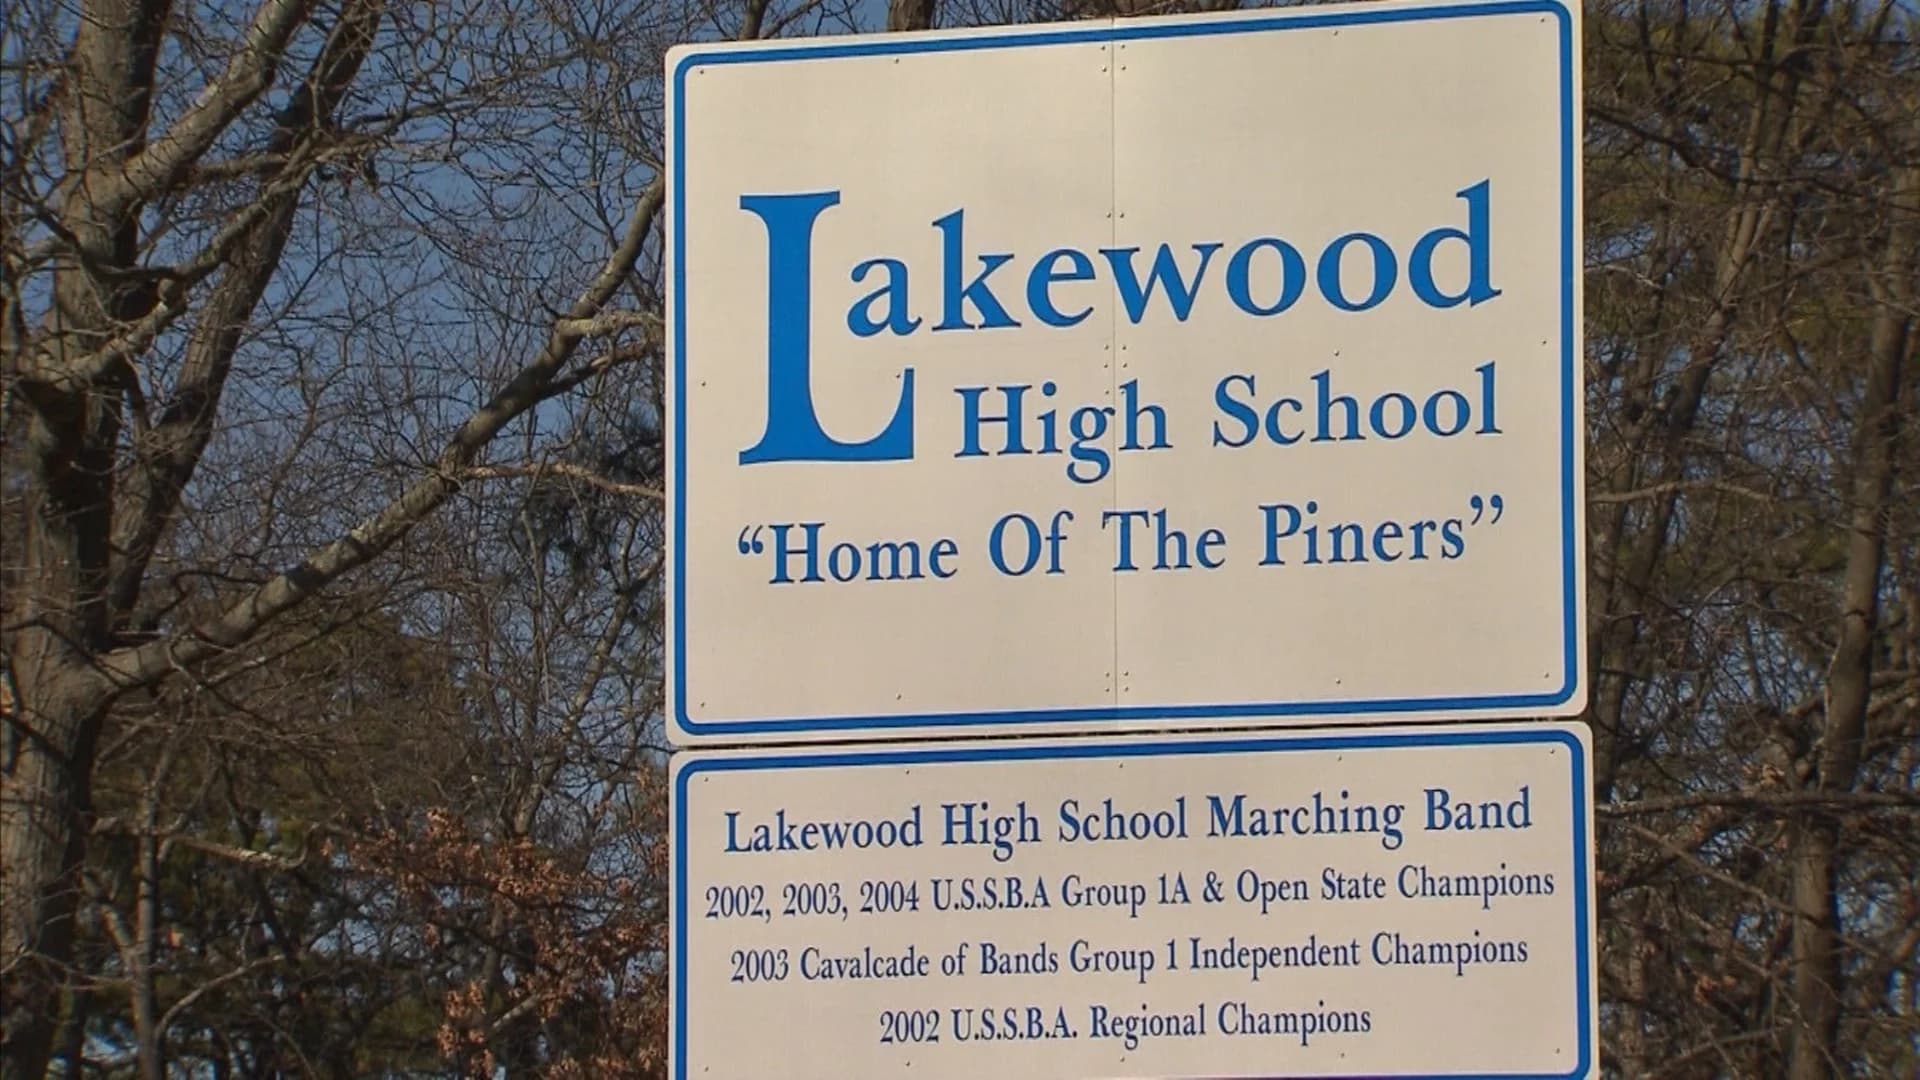 Lakewood Township School District faces financial issues